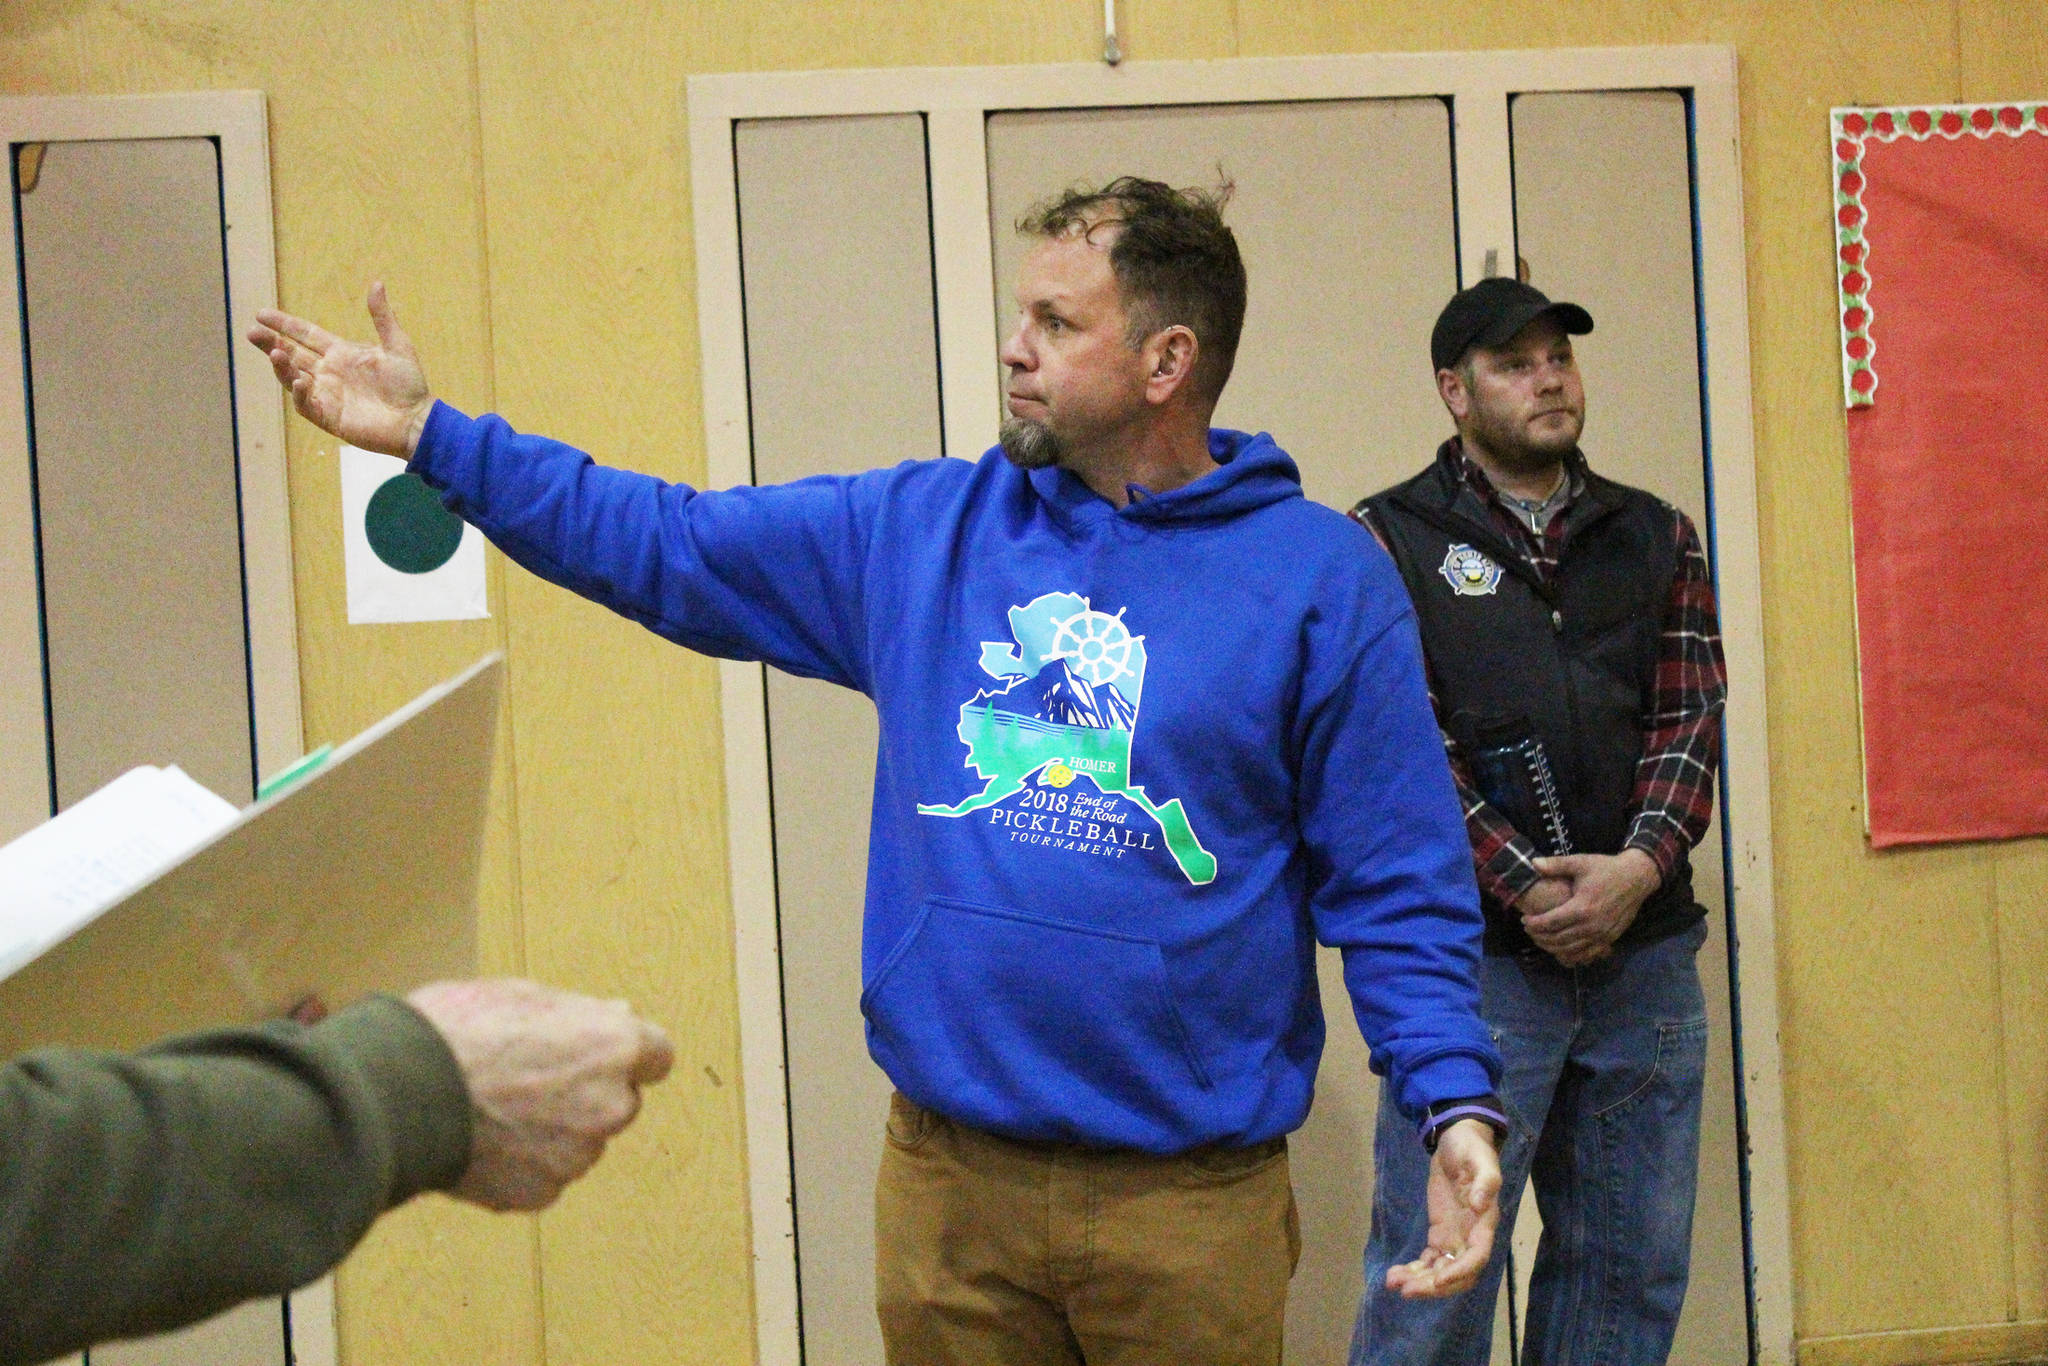 Homer Community Recreation Program Director Mike Illg describes the uses and capacities of the gymnasium inside one of the two Homer Education and Recreation Complex buildings during a walk-through Tuesday, June 26, 2018 in Homer, Alaska. Illg is also a member of the Parks, Art, Culture and Recreation Advisory Commission. The city’s HERC Task Force inspected the building along with members of the public while city staff answered questions about the two buildings’ history and current state. (Photo by Megan Pacer/Homer News)